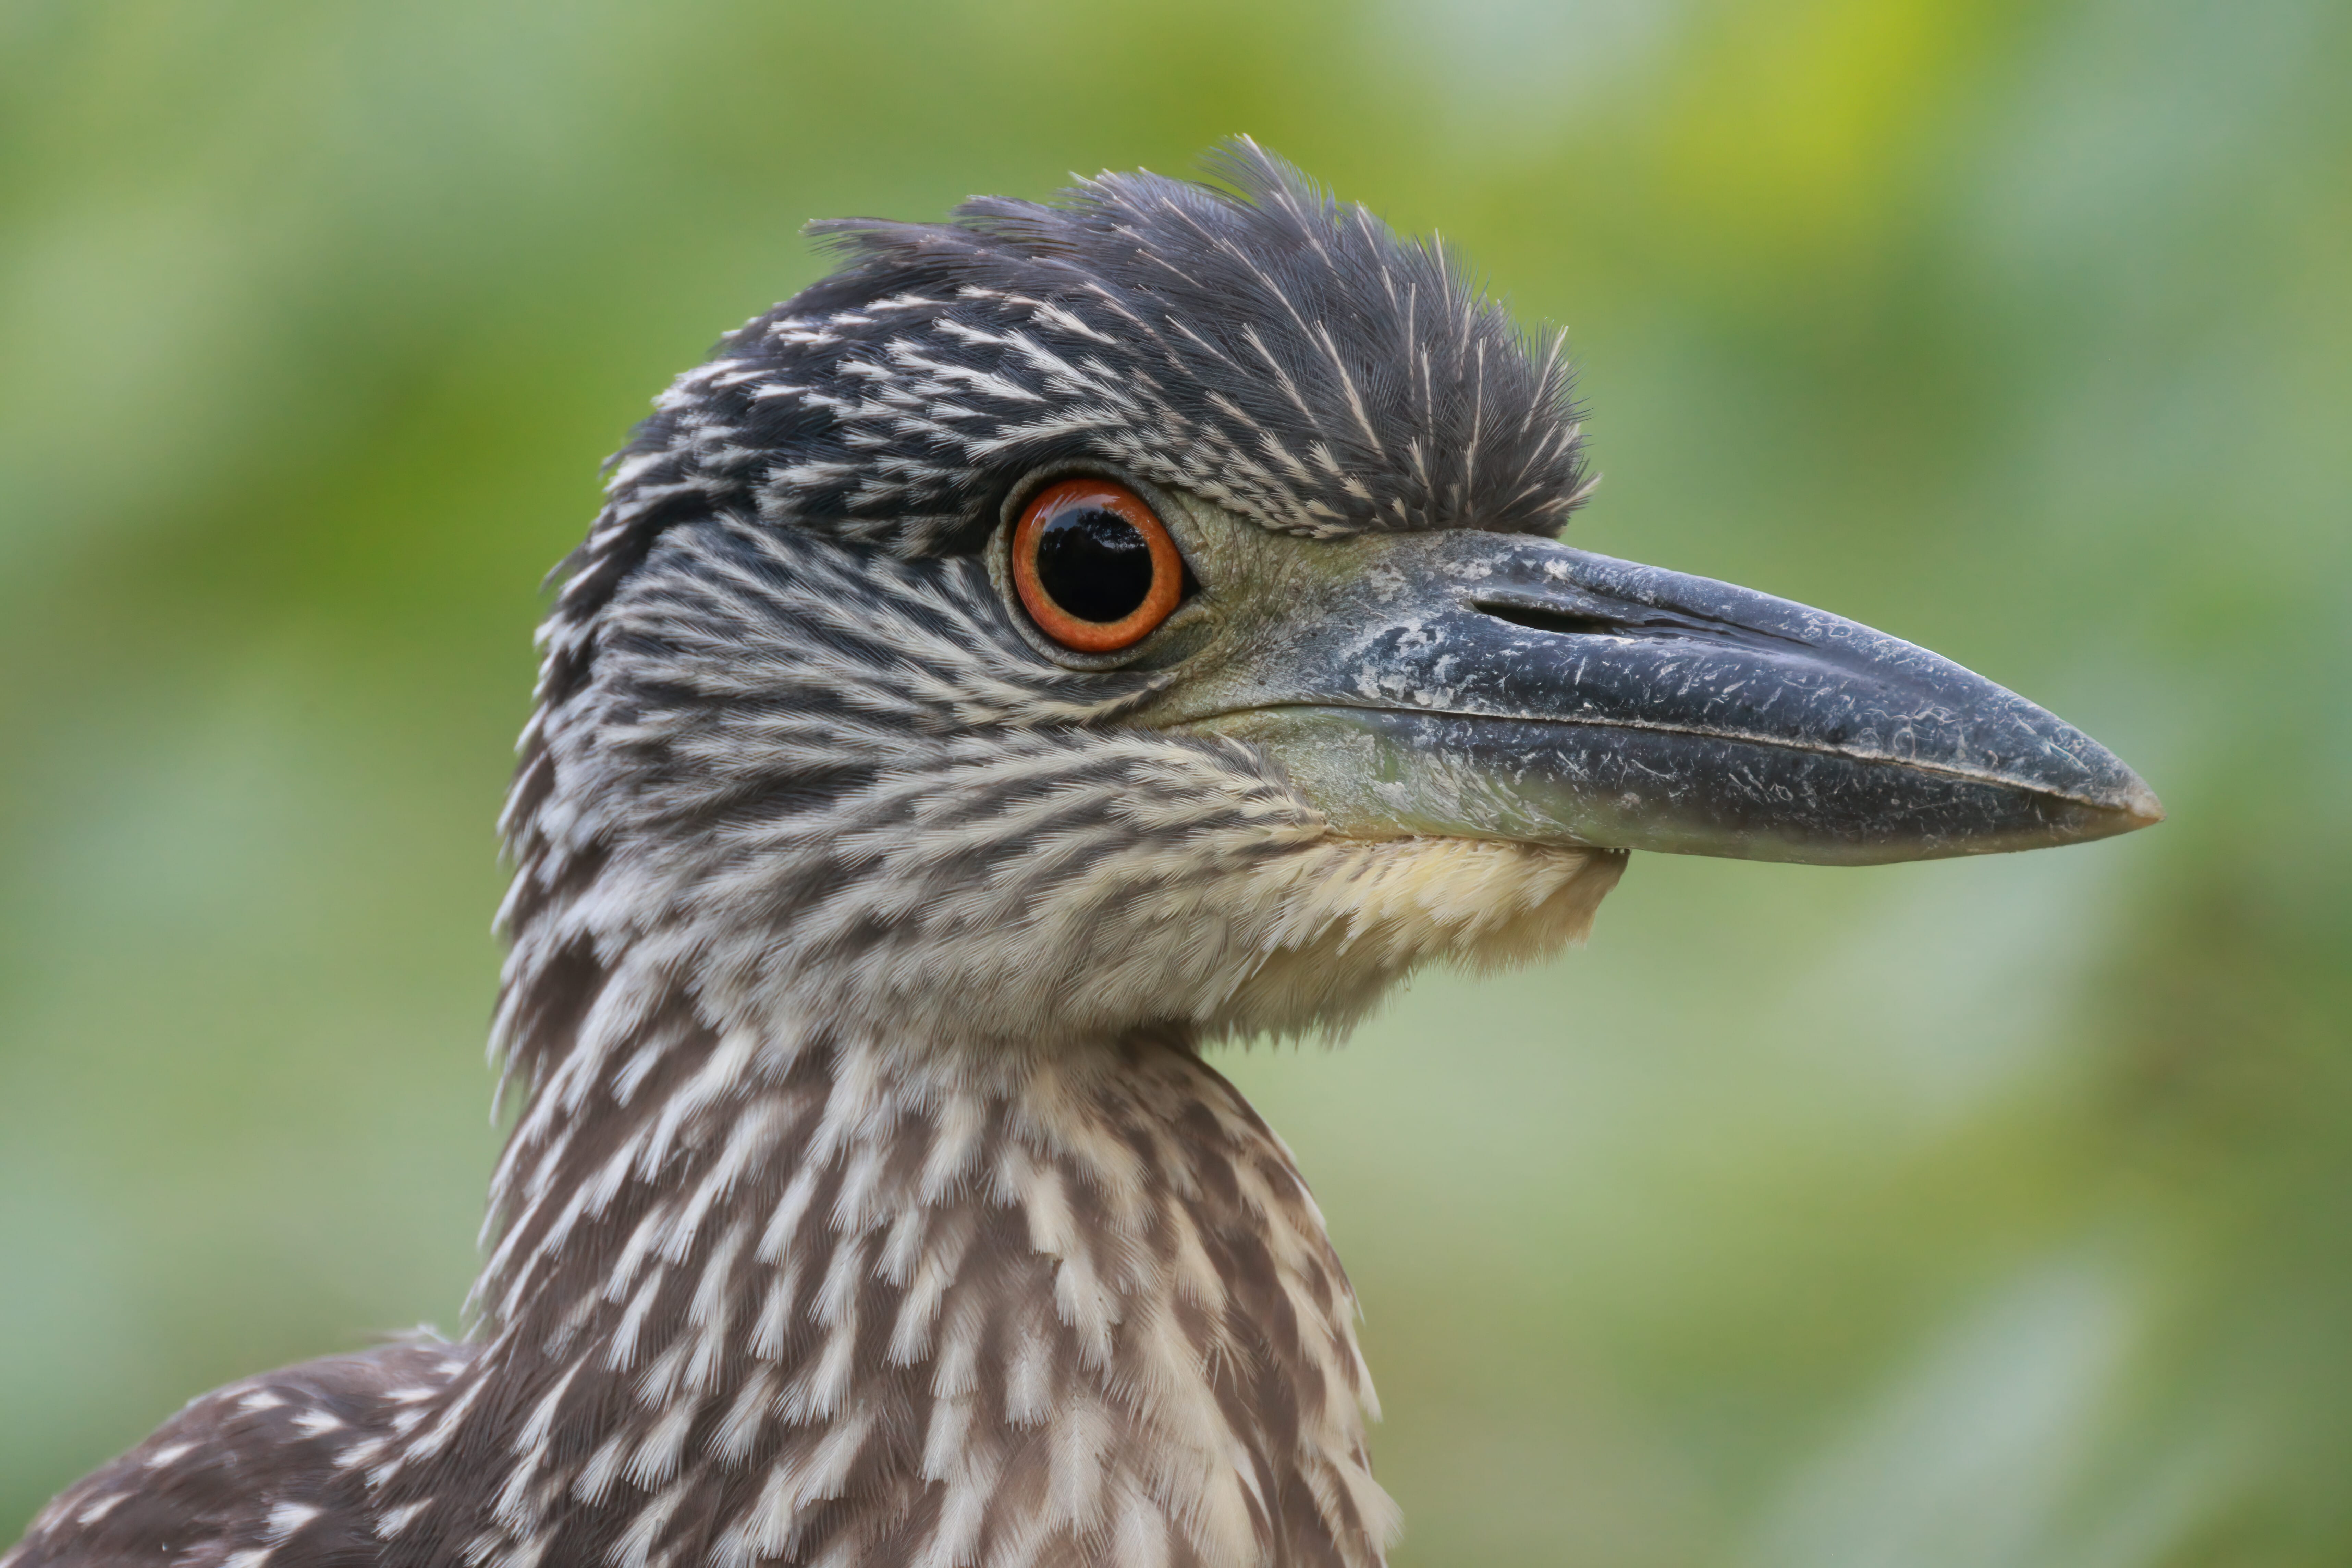 A close crop of a Yellow-crowned Night-Heron's eyes